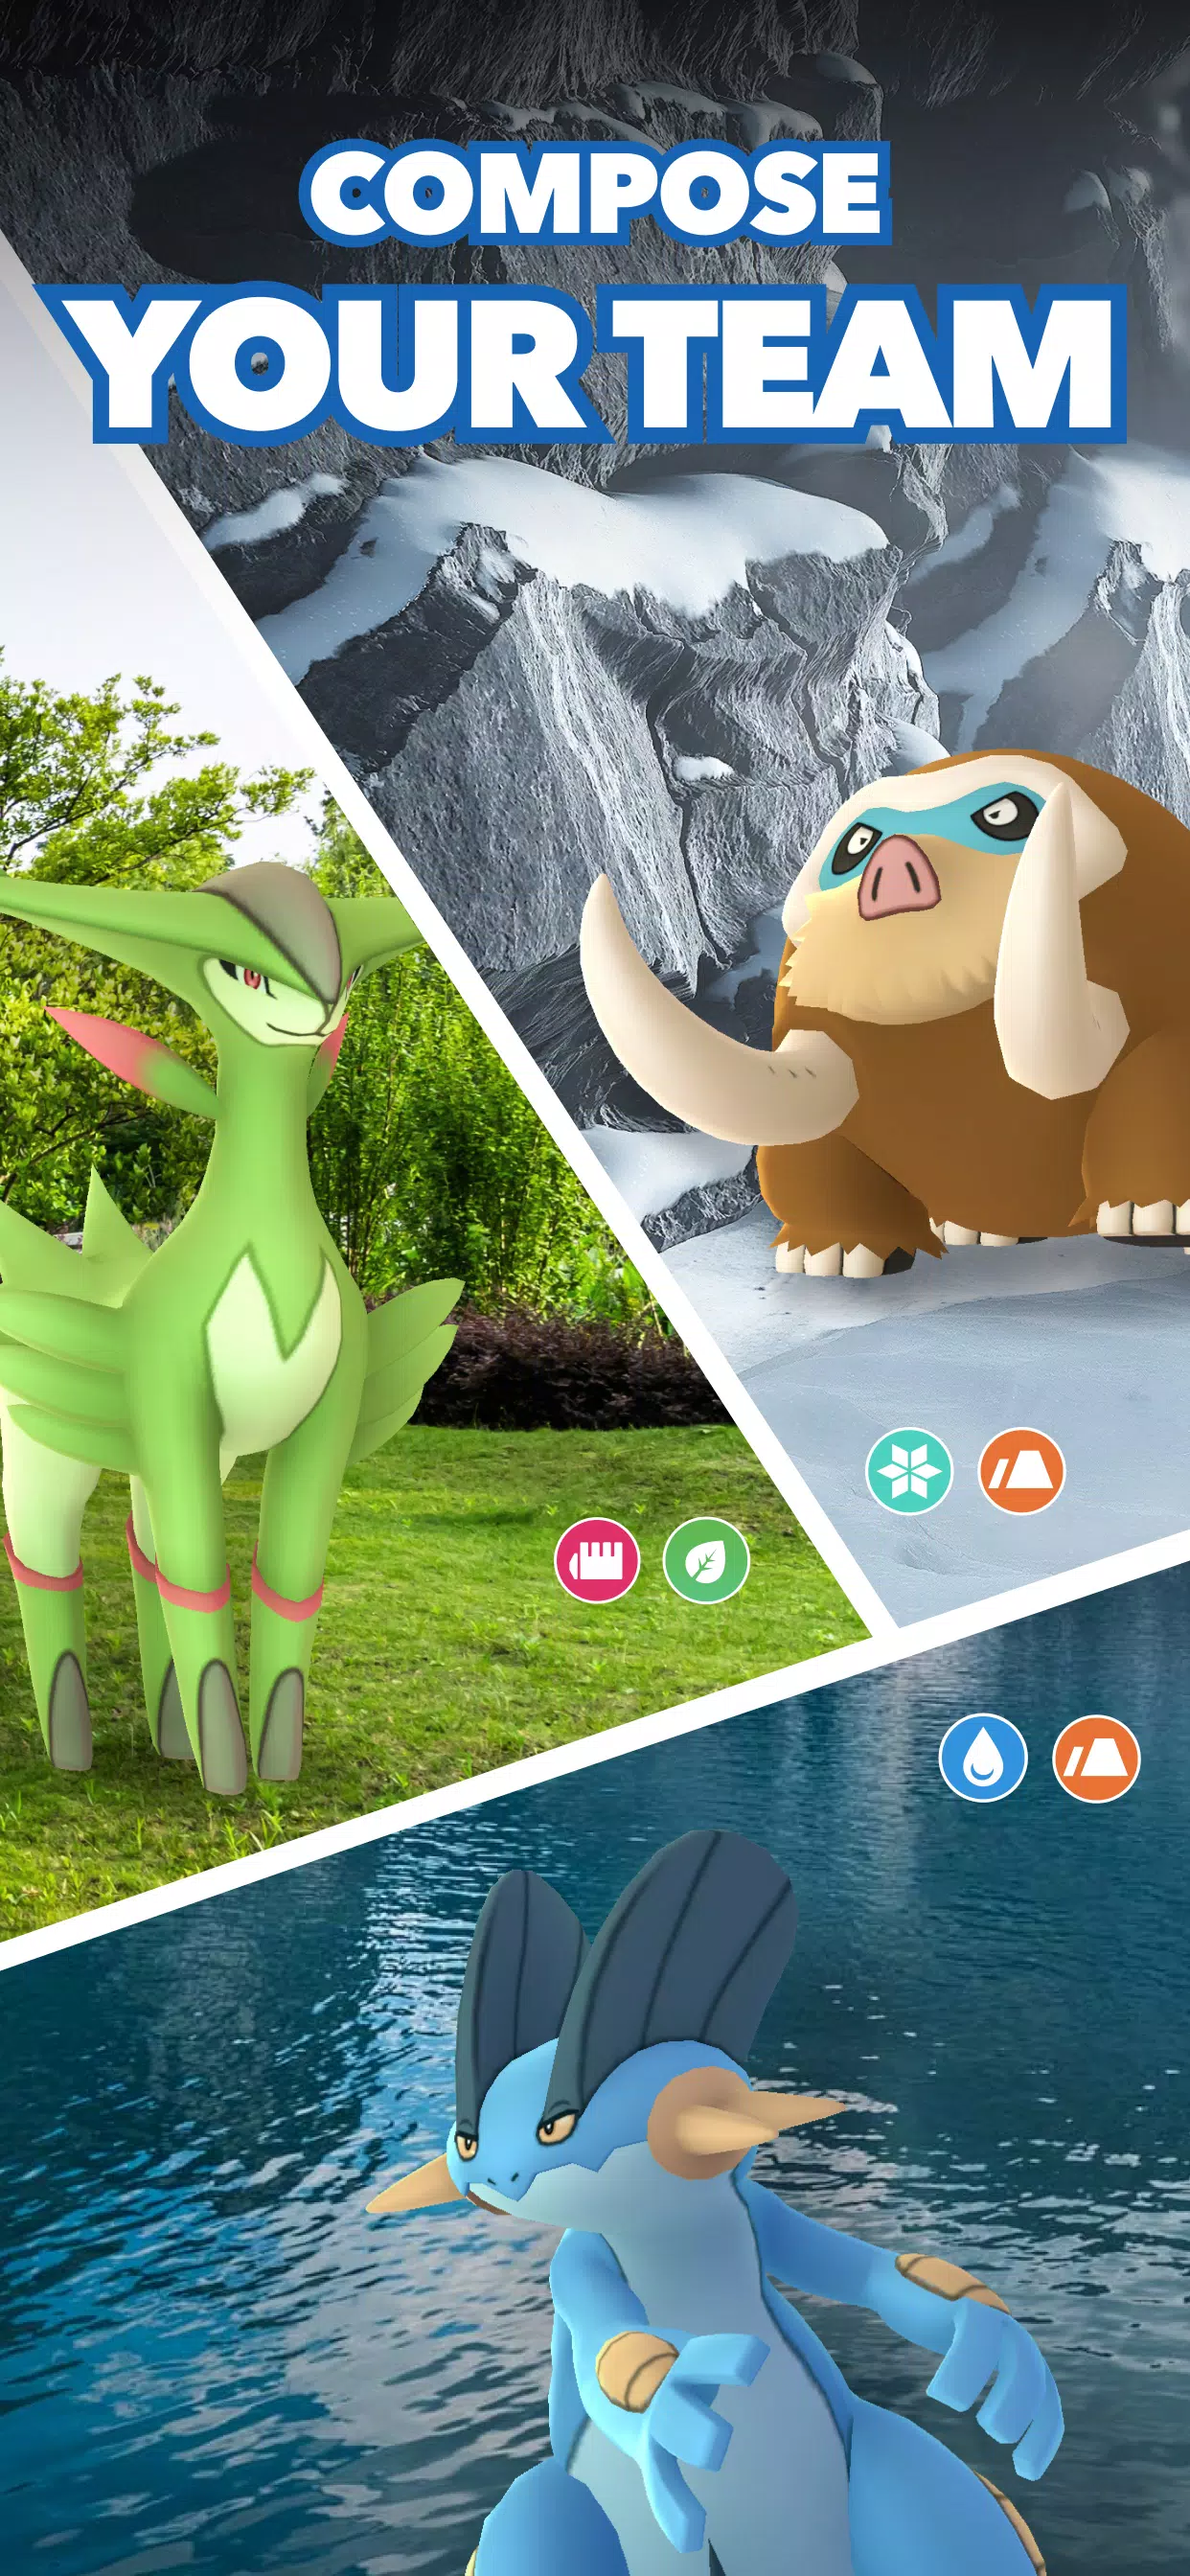 Download Pokémon GO APK for Android, Play on PC and Mac